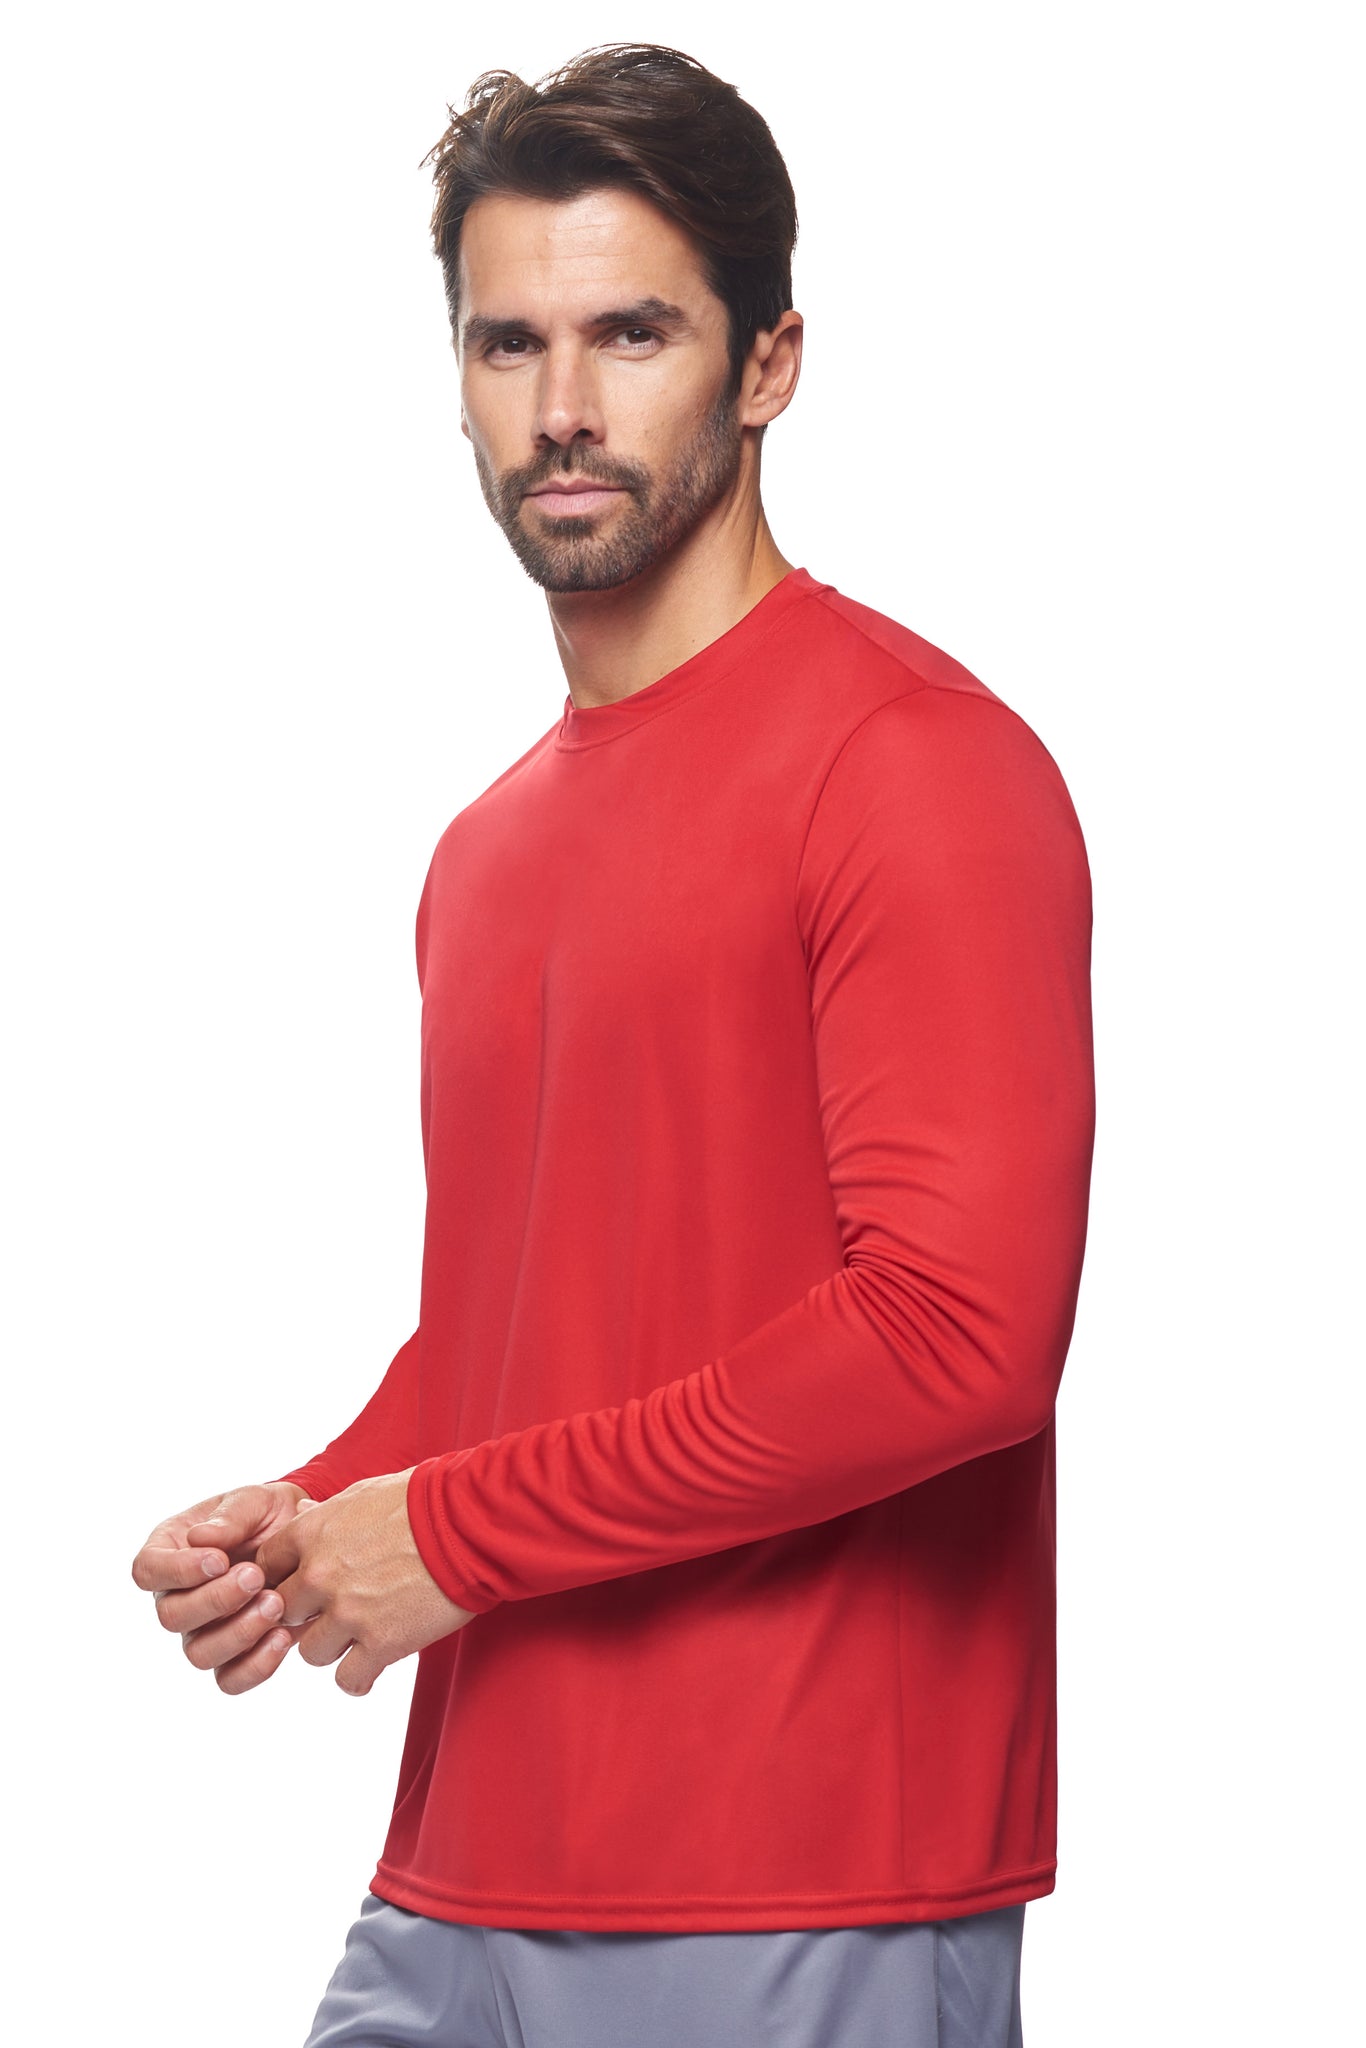 Expert Brand Wholesale Made in USA Activewear Performance Long Sleeve Expert Tee pk MaX™ Crewneck 2#red